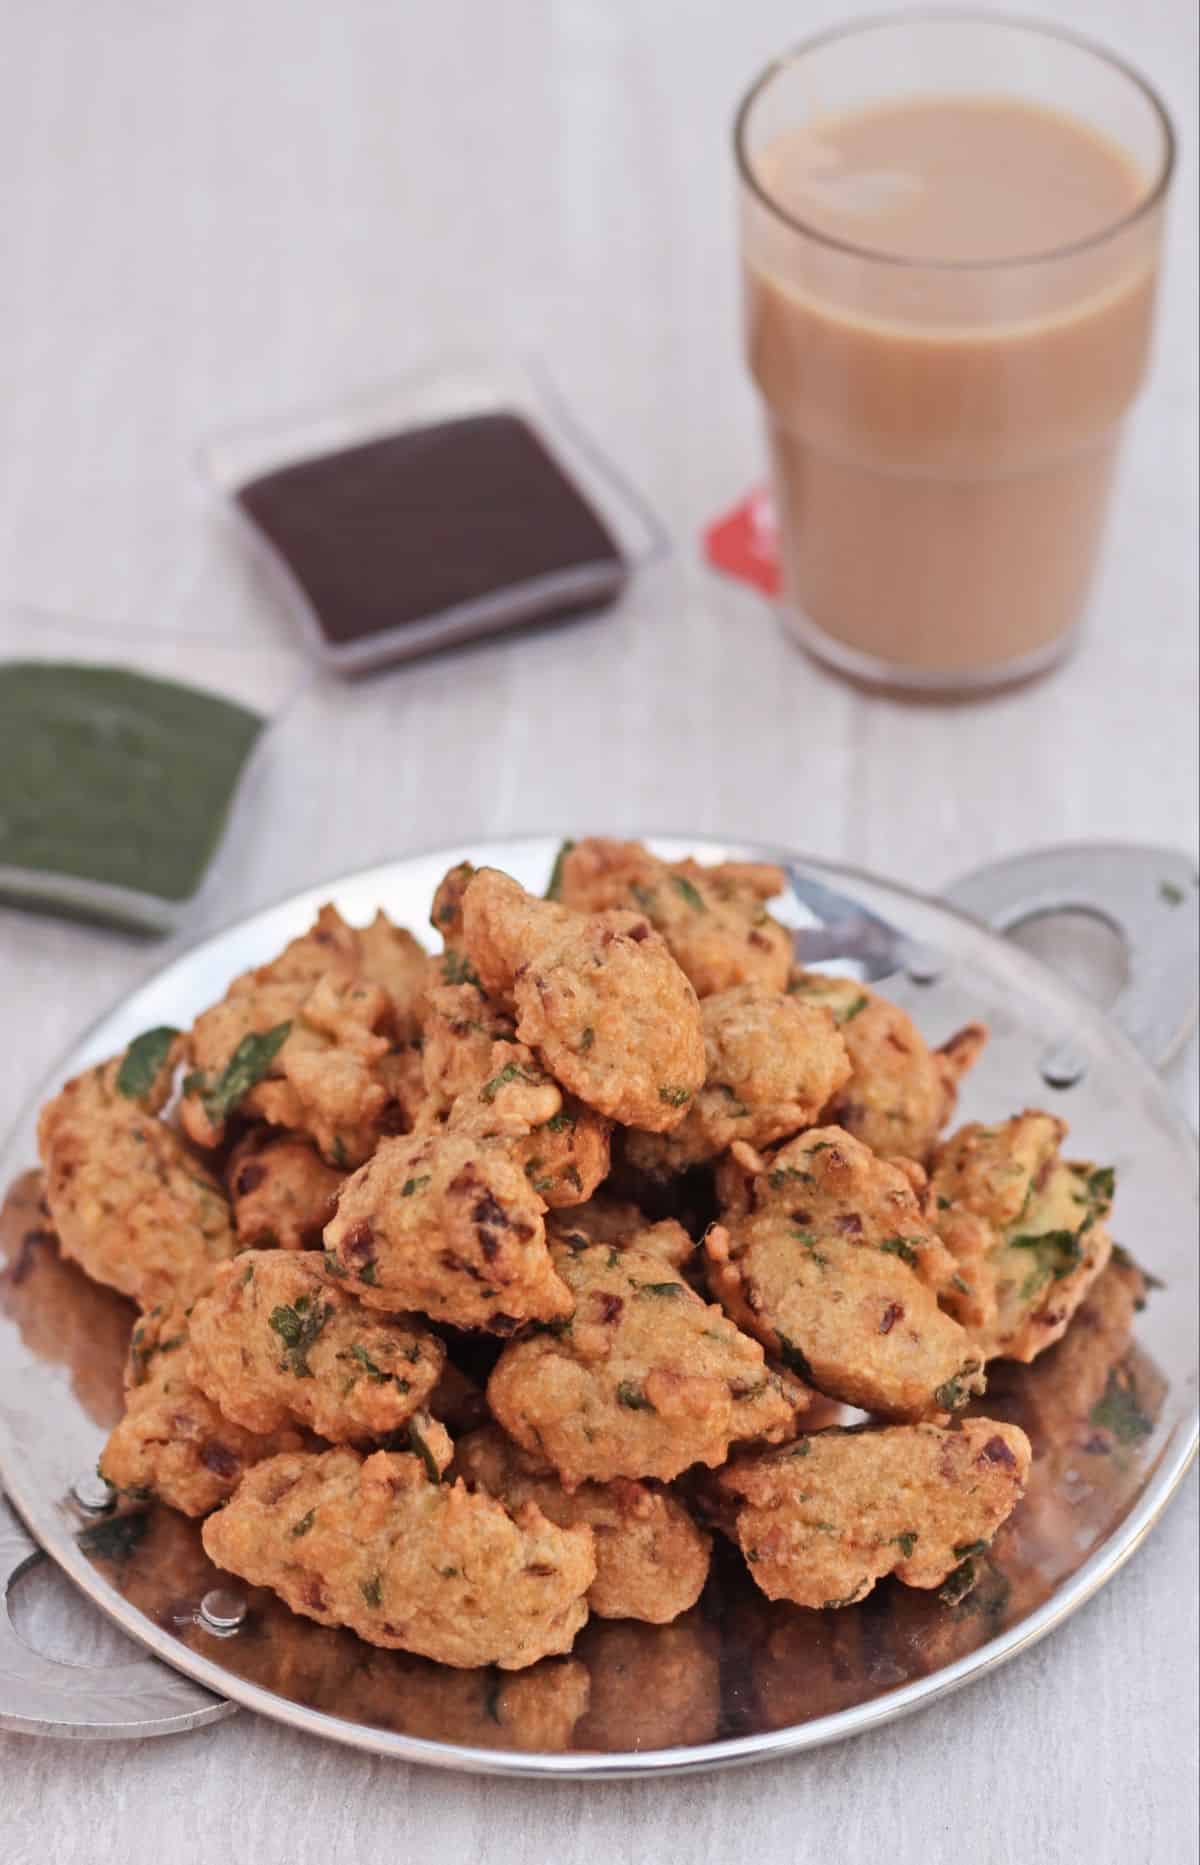 Moon dal pakoda with chutney and tea in the background